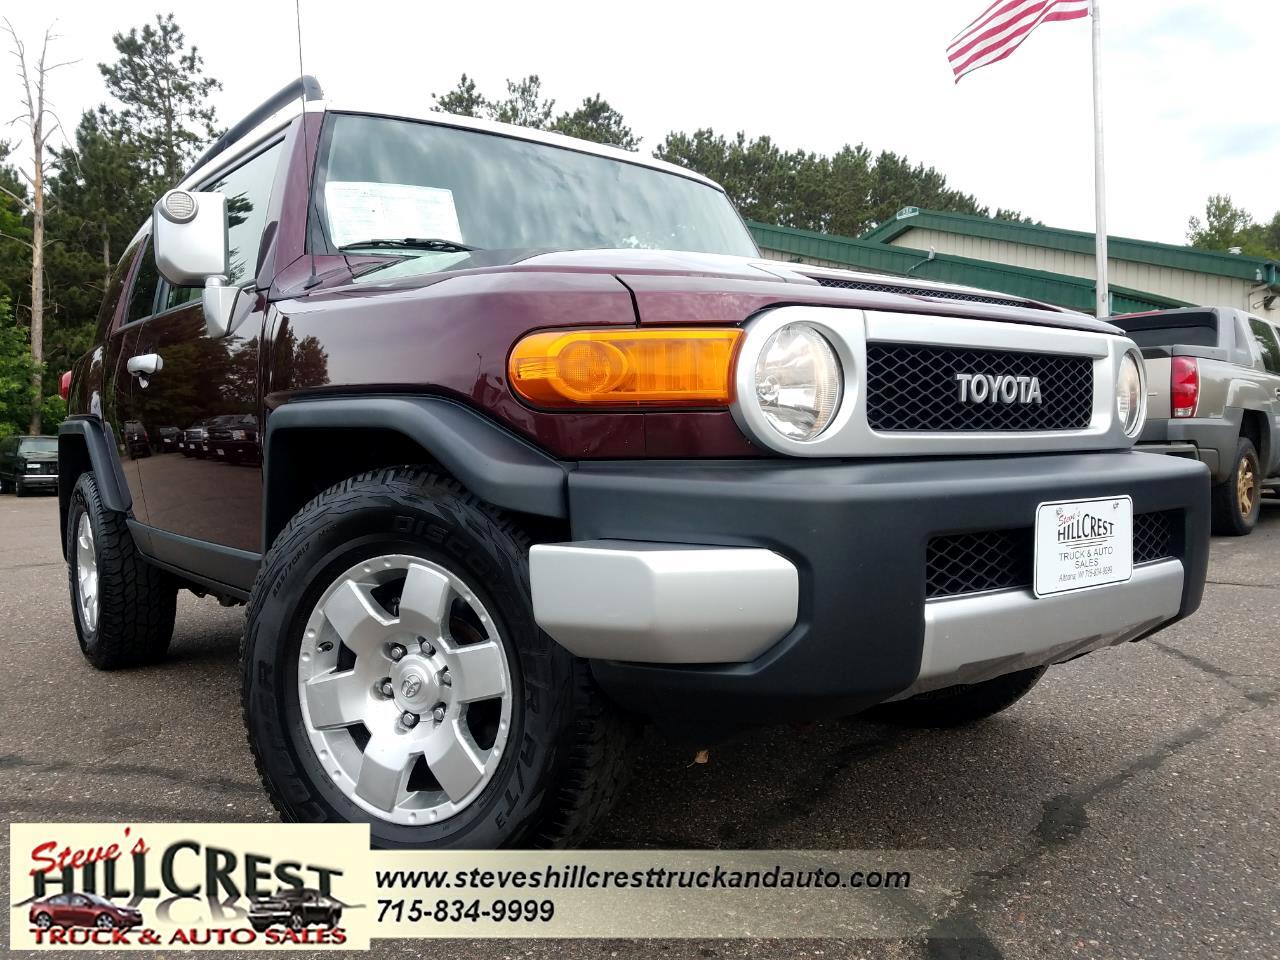 Used 2007 Toyota Fj Cruiser 2wd For Sale In Eau Claire Wi 54720